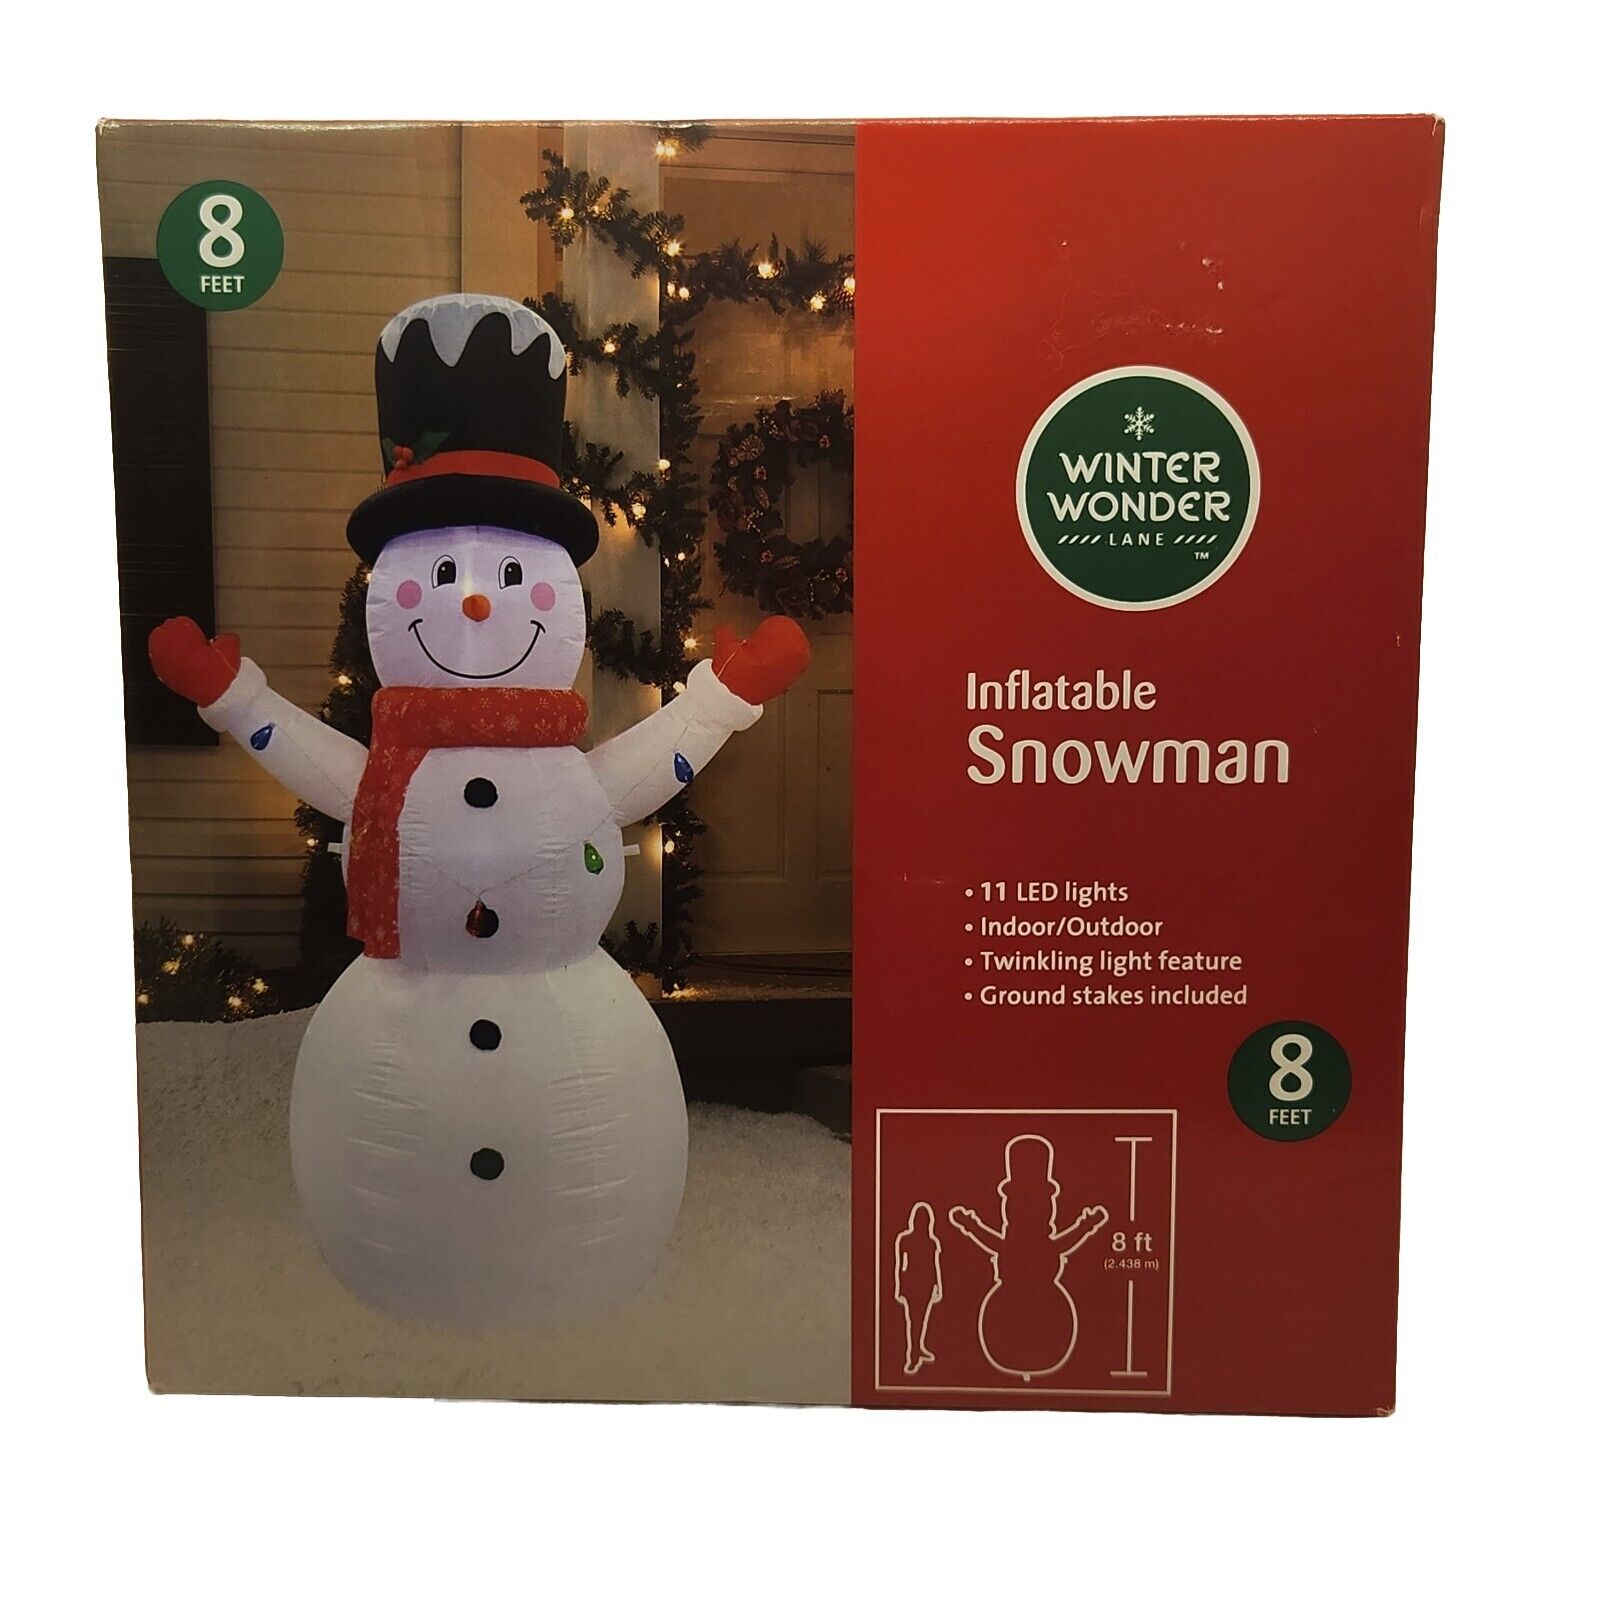 Winter Wonder NEW 8' Inflatable Snowman With LED Lights Includes Stakes